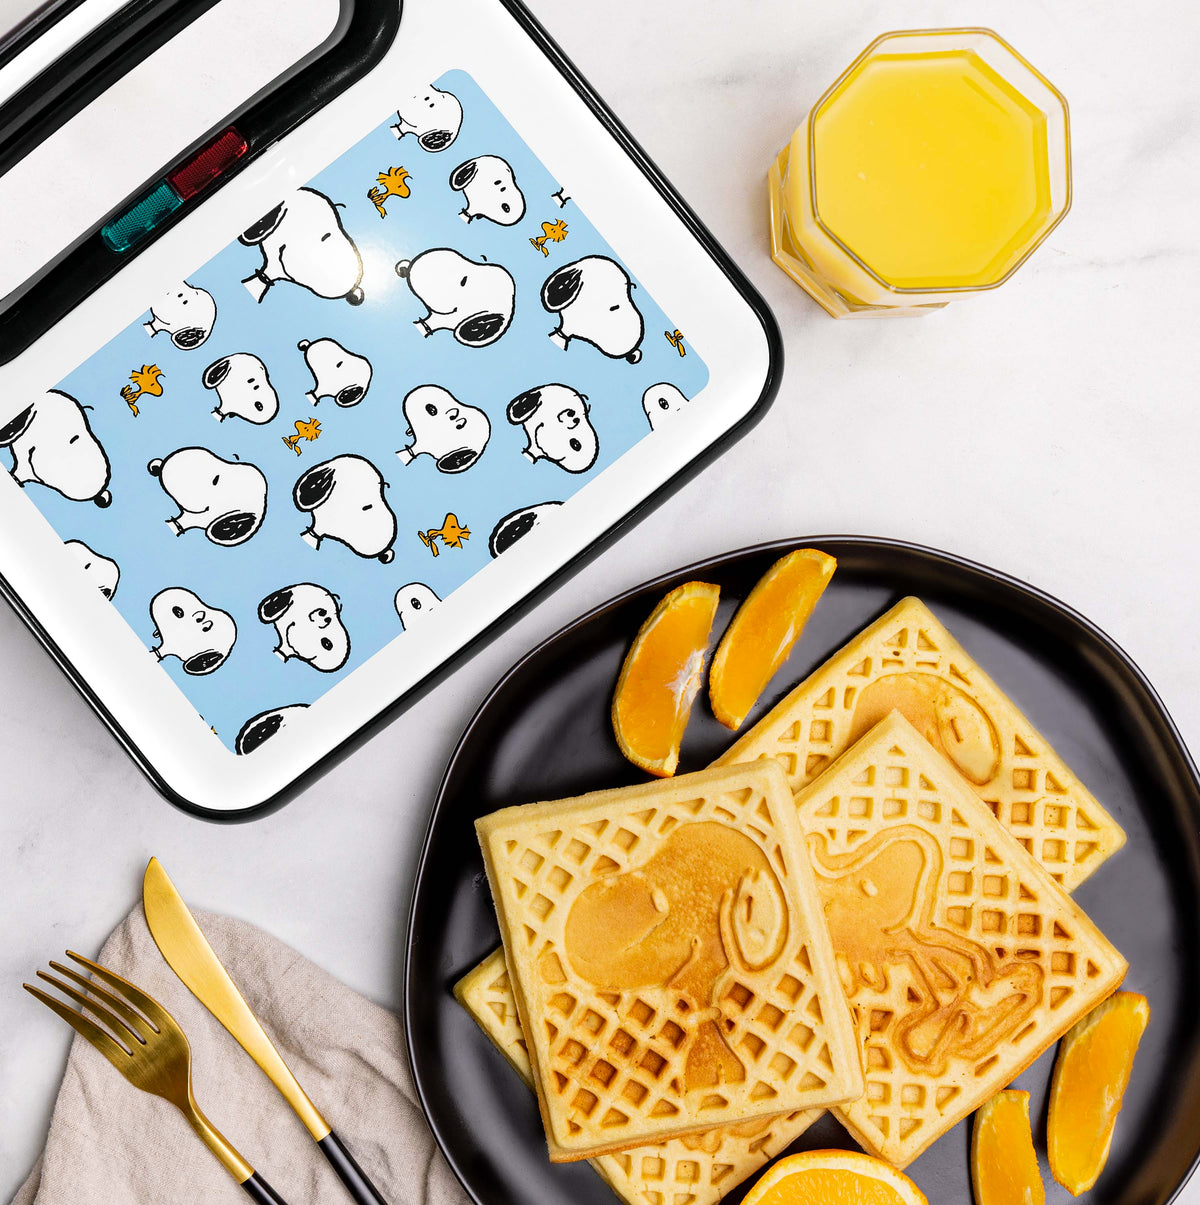 Peanuts Snoopy &amp; Woodstock Square Waffle Maker